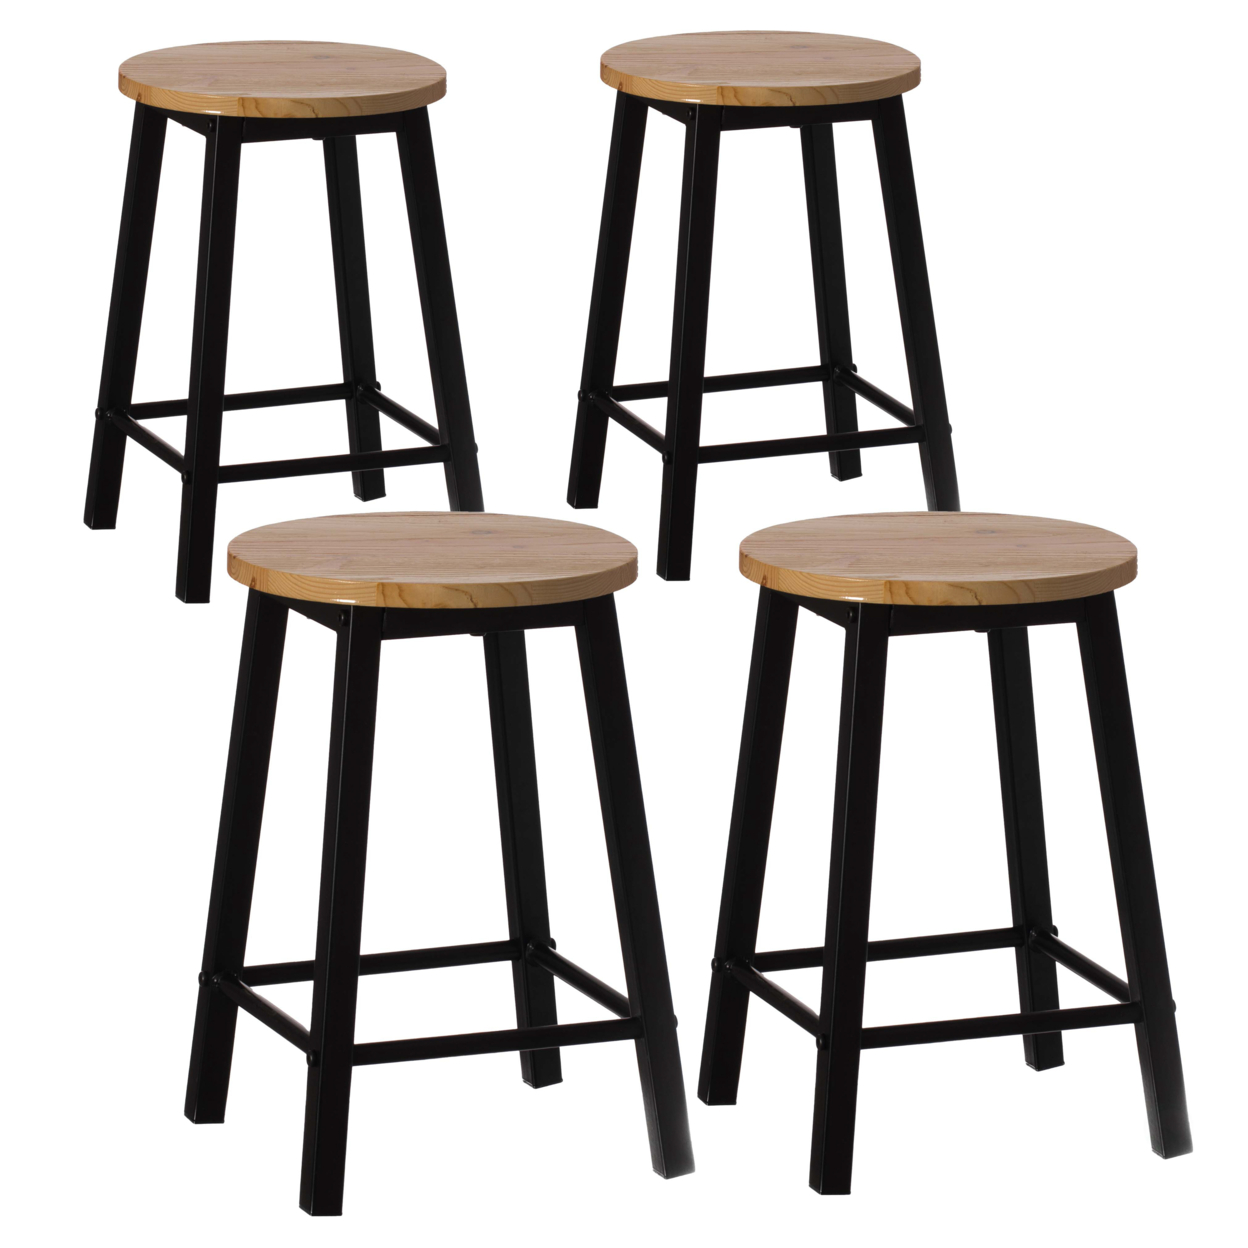 17.5 High Wooden Black Round Bar Stool With Footrest For Indoor And Outdoor - Single